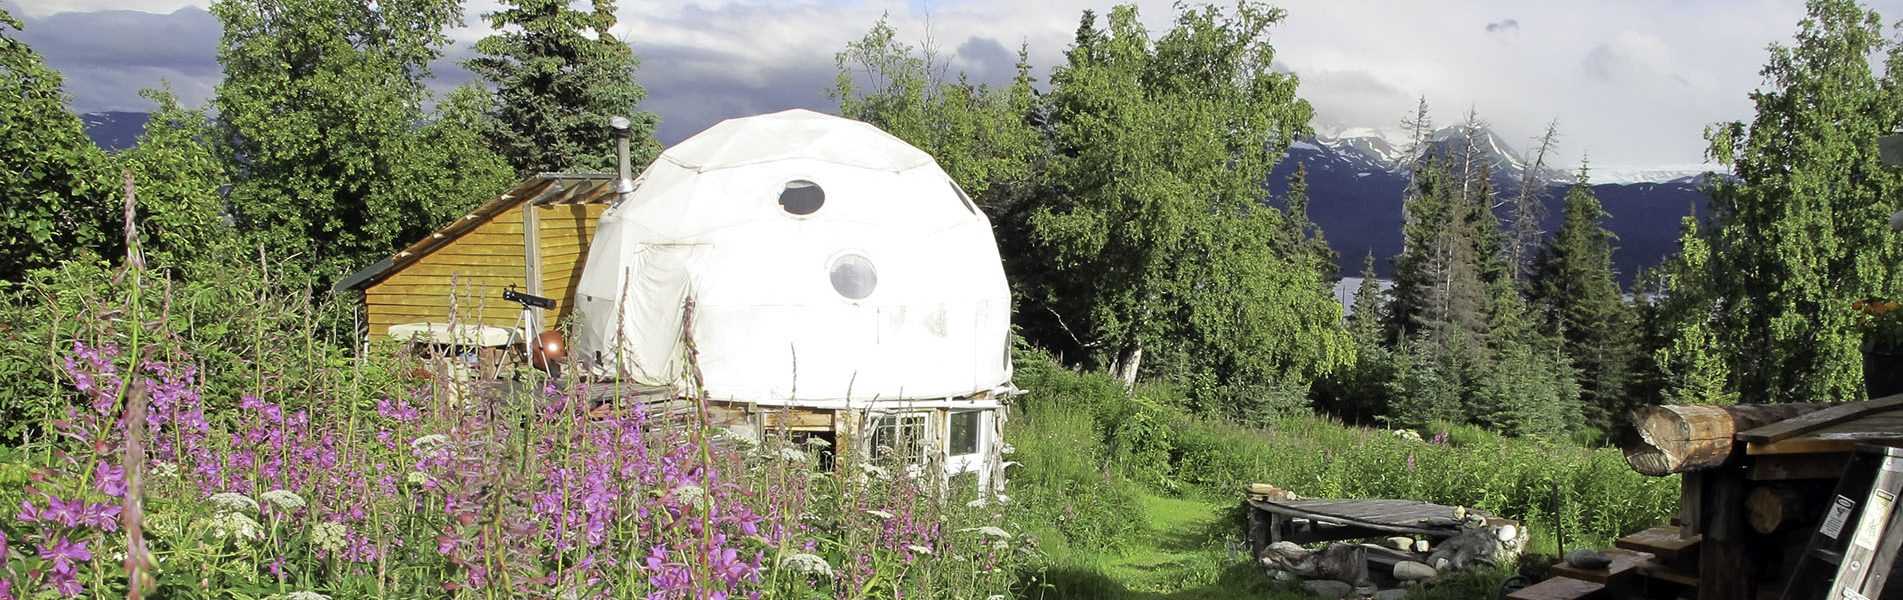 Dome home shelter dome